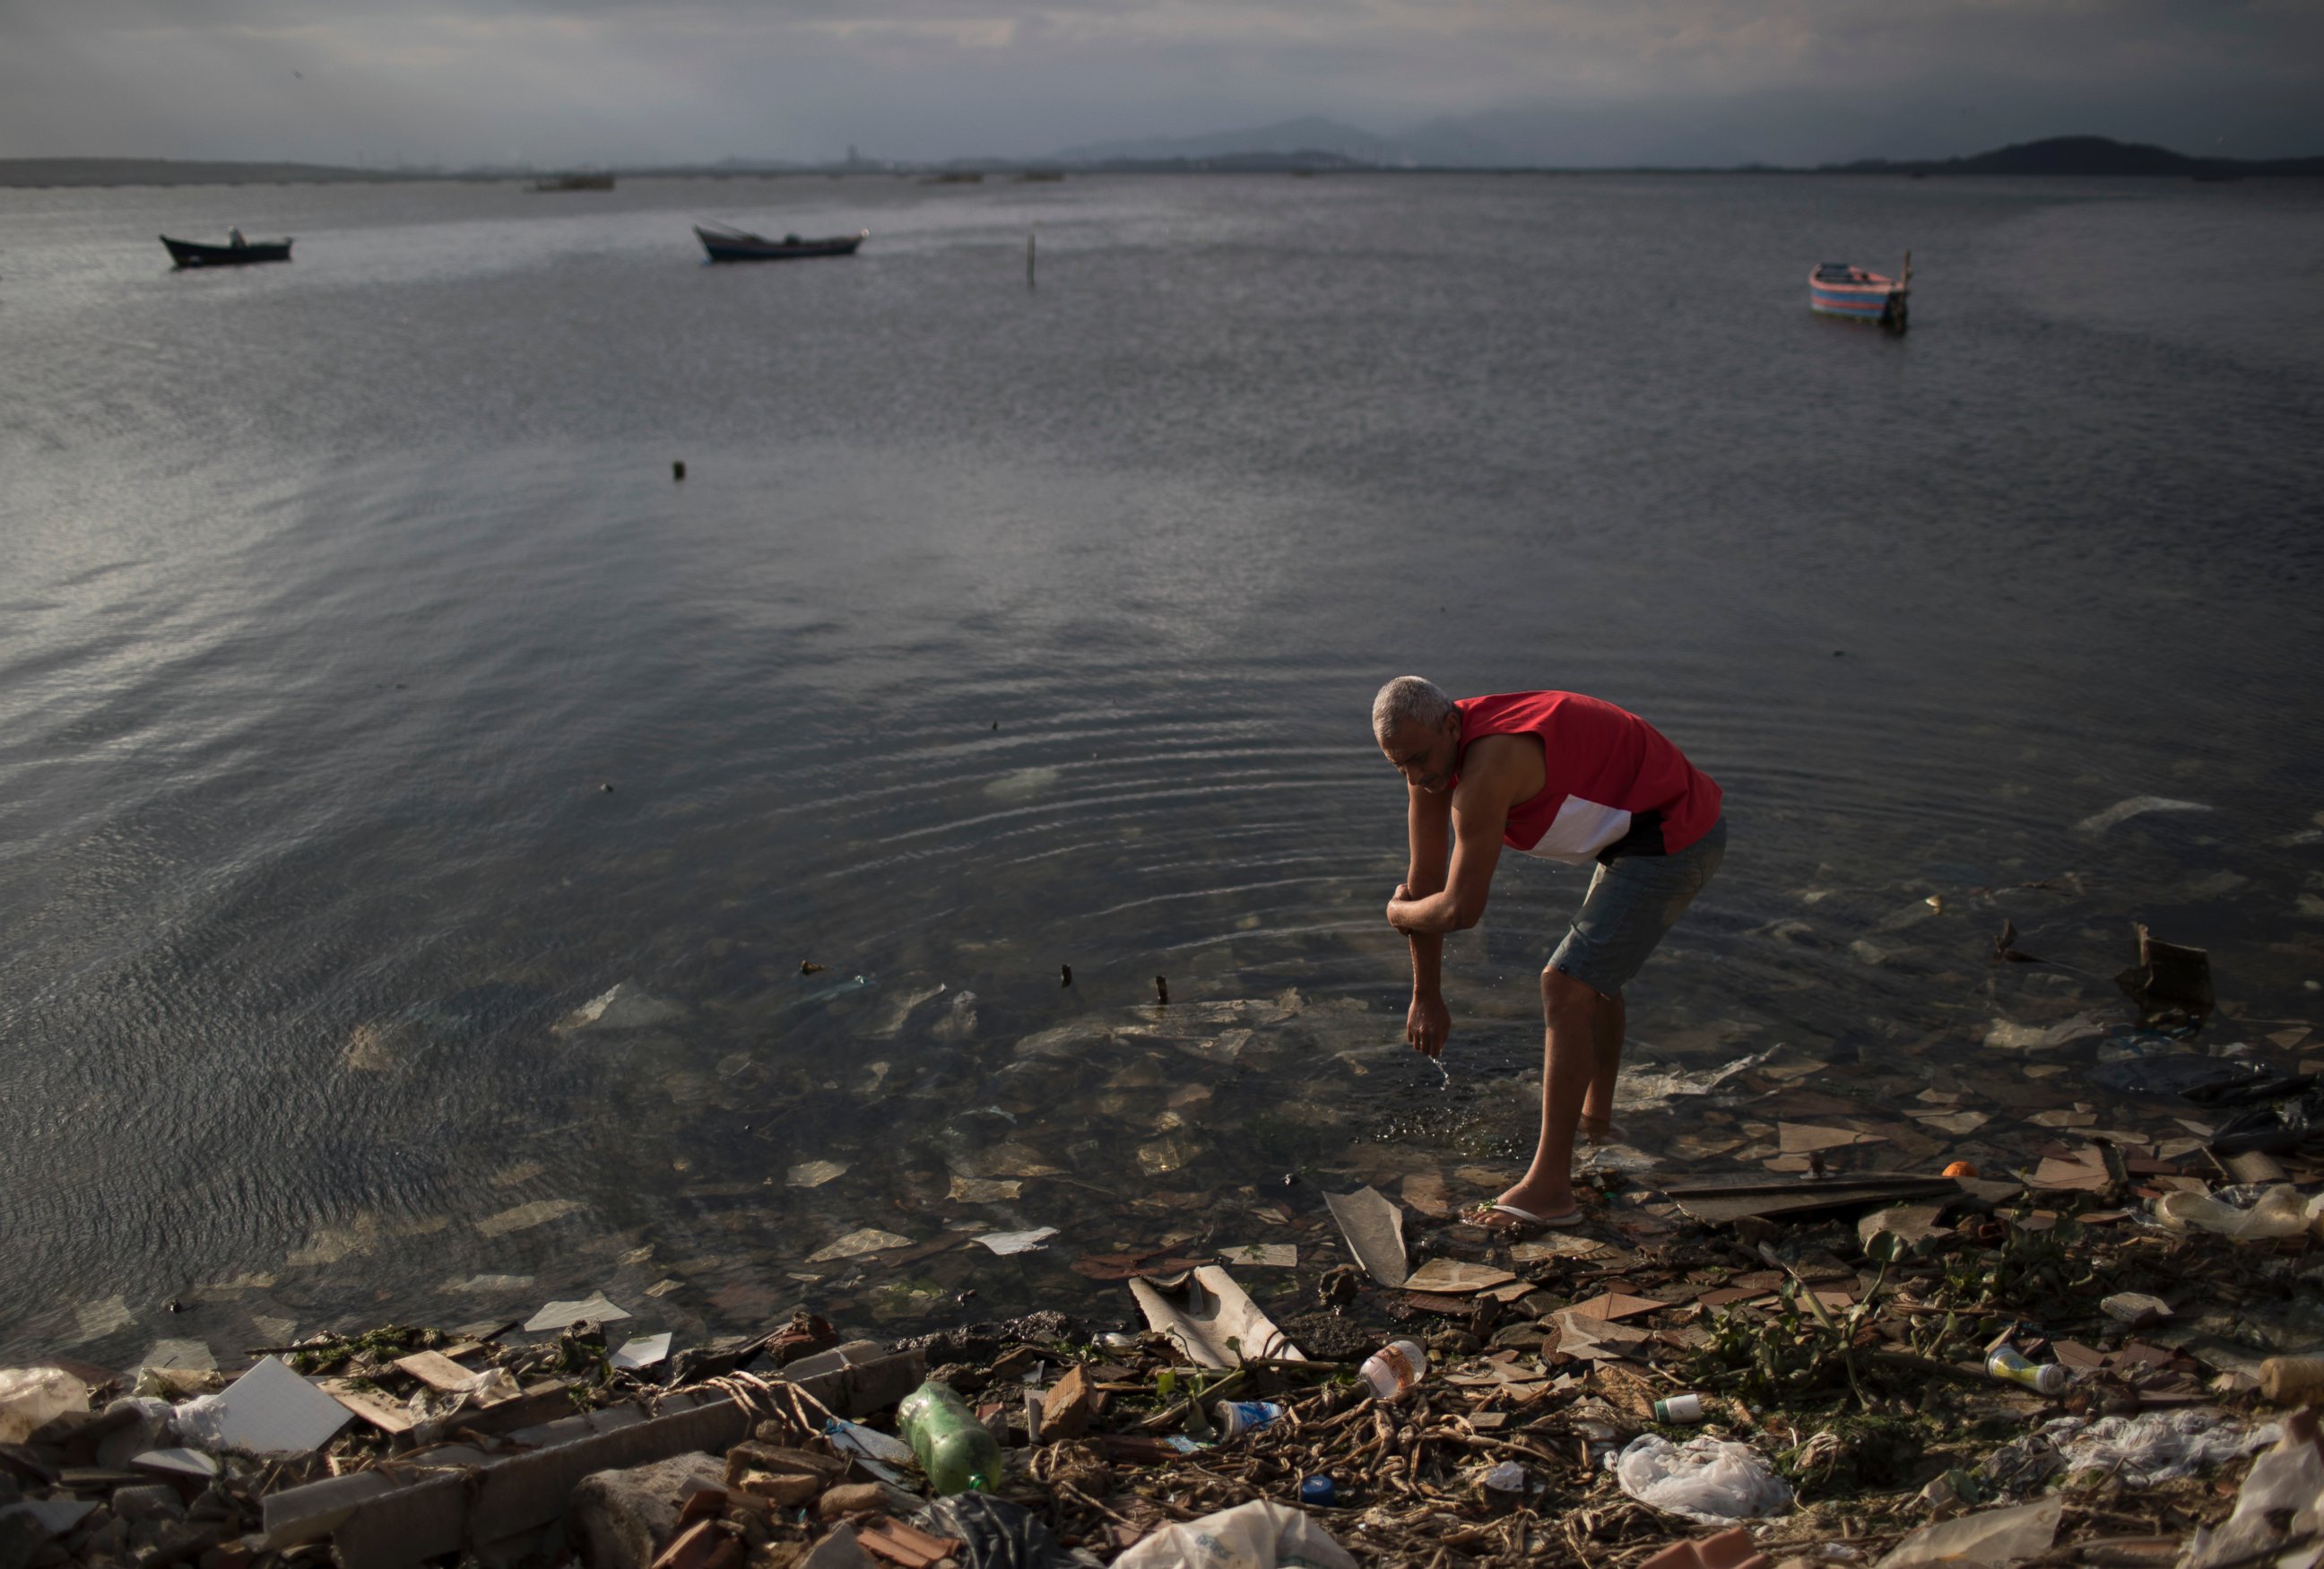 PHOTO: A man washes himself in the polluted waters of Guanabara Bay in Rio de Janeiro, Brazil, July 30, 2016.